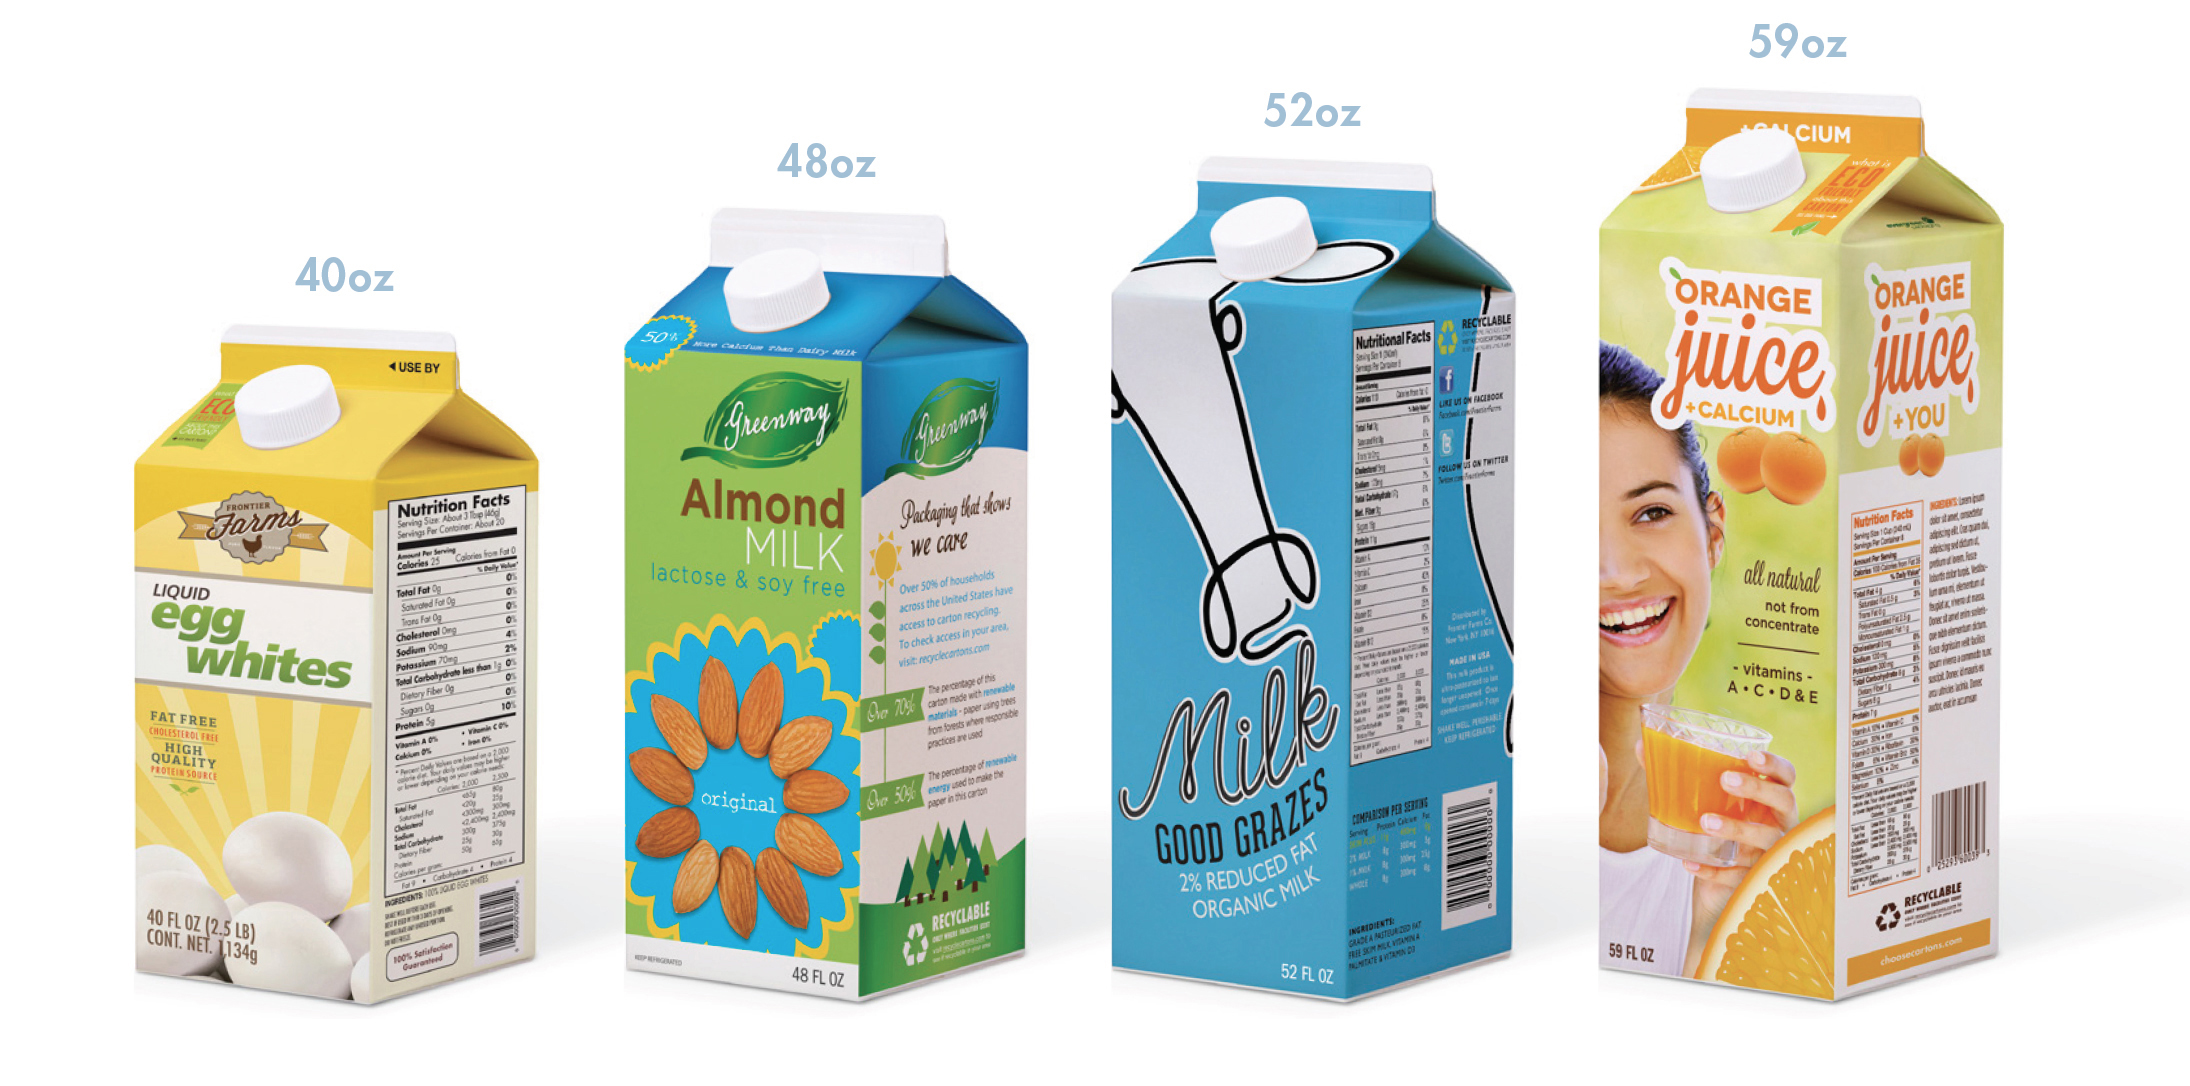 Rising demand for different carton sizes as household numbers decline